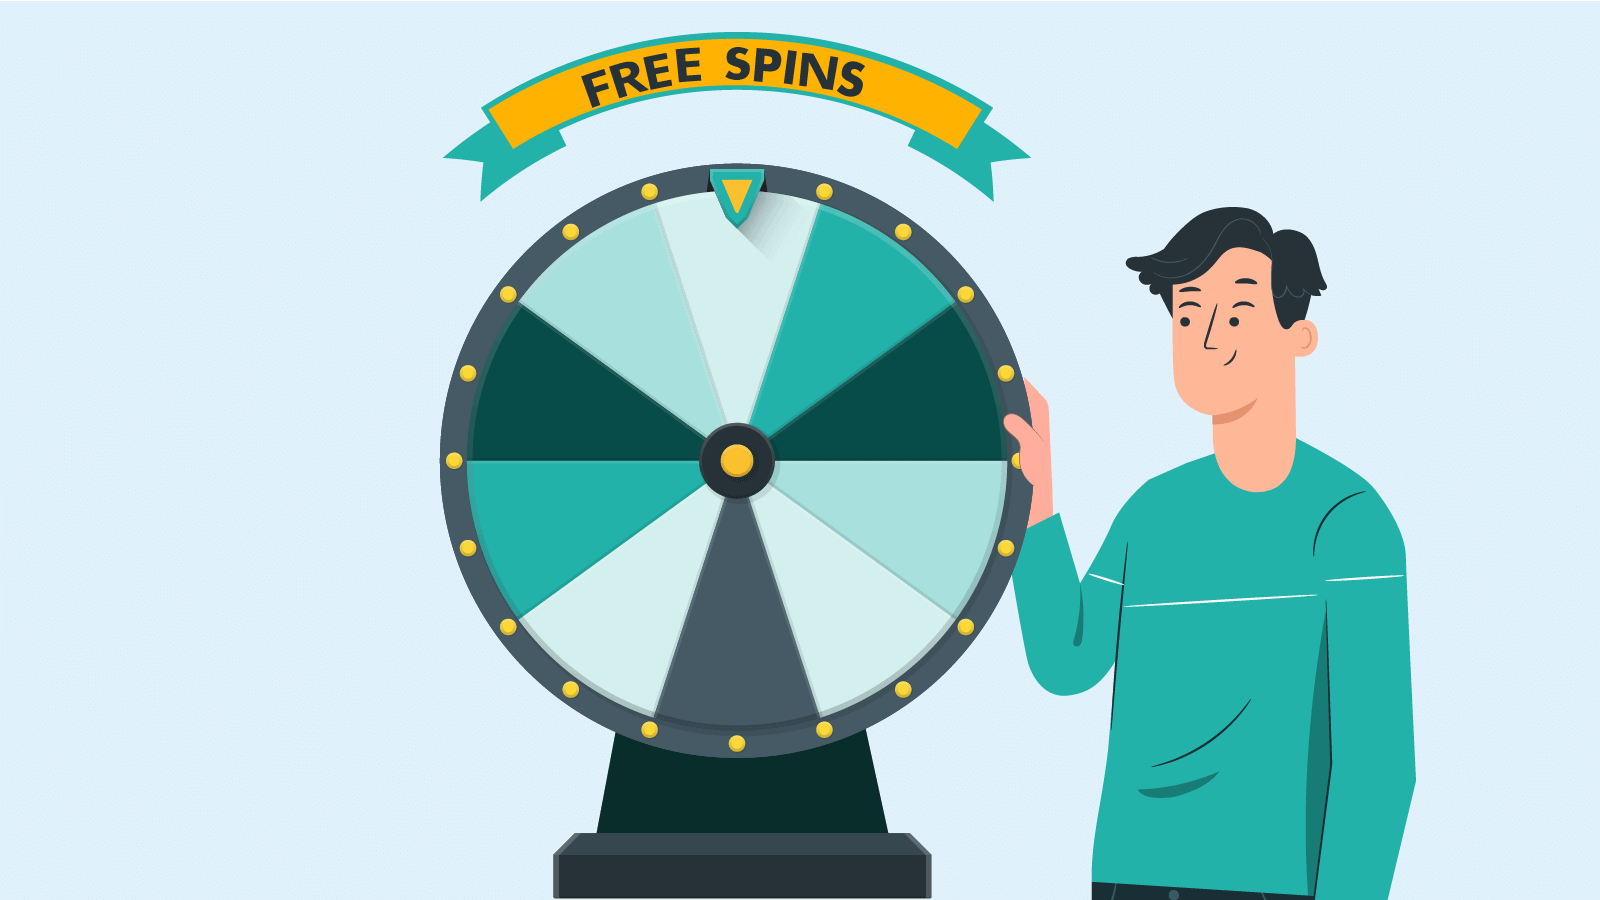 Our best 30 free spins deals selection process